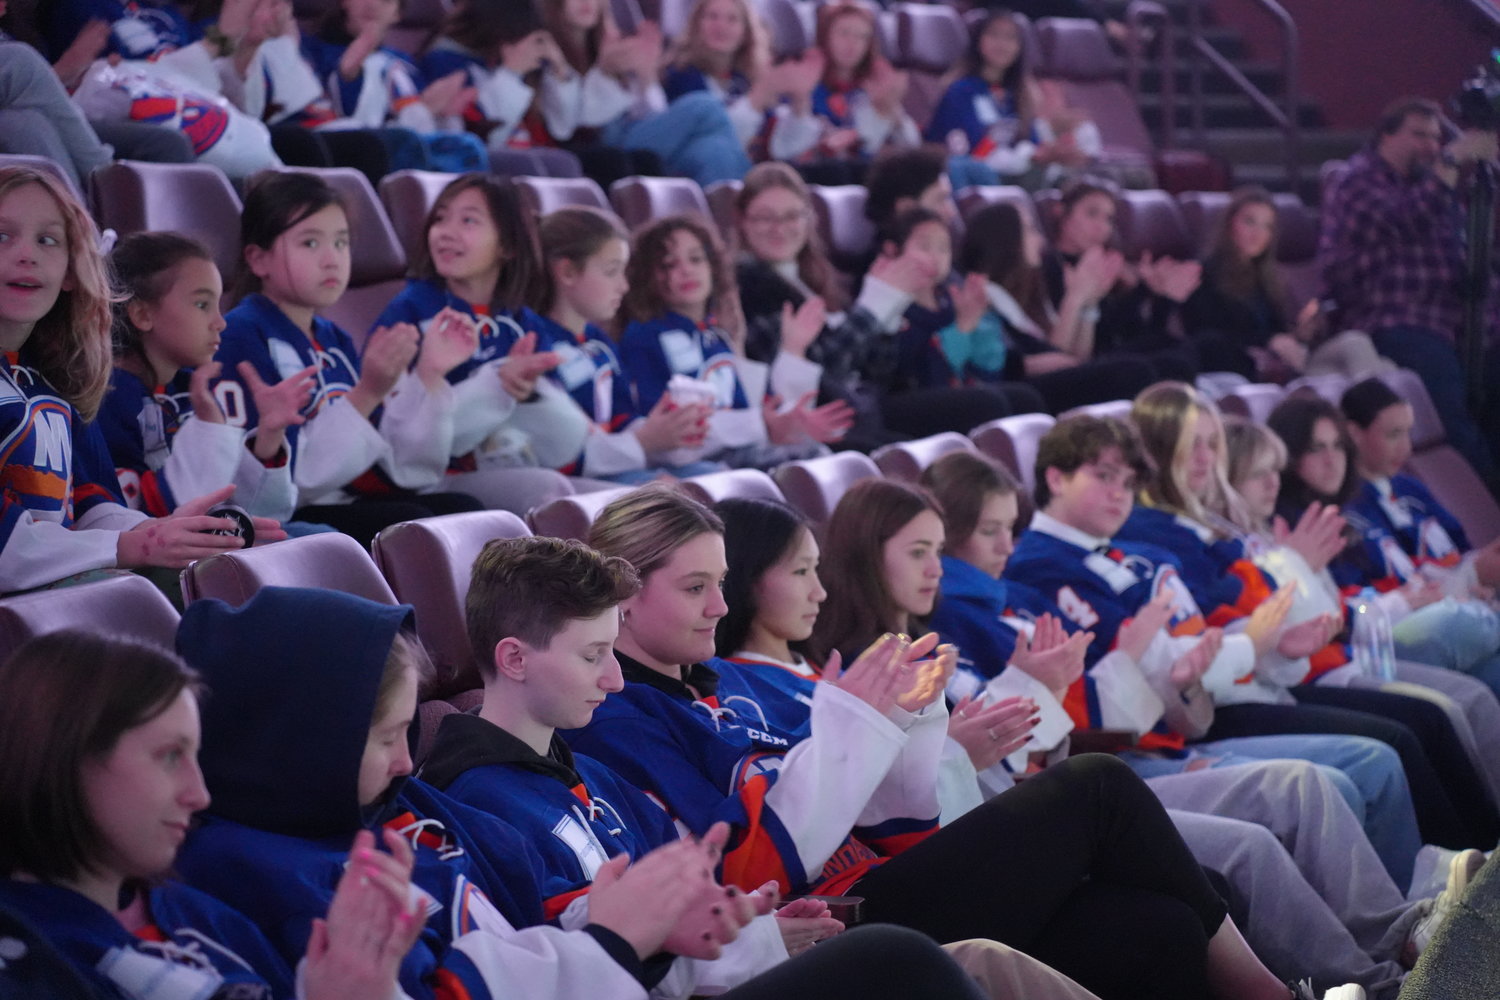 Members of the New York Islanders Girls Elite Hockey program joined their parents and coaches celebrating the 50th anniversary of Title IX last week with a panel of women who spoke about how the groundbreaking law shaped their professional careers.